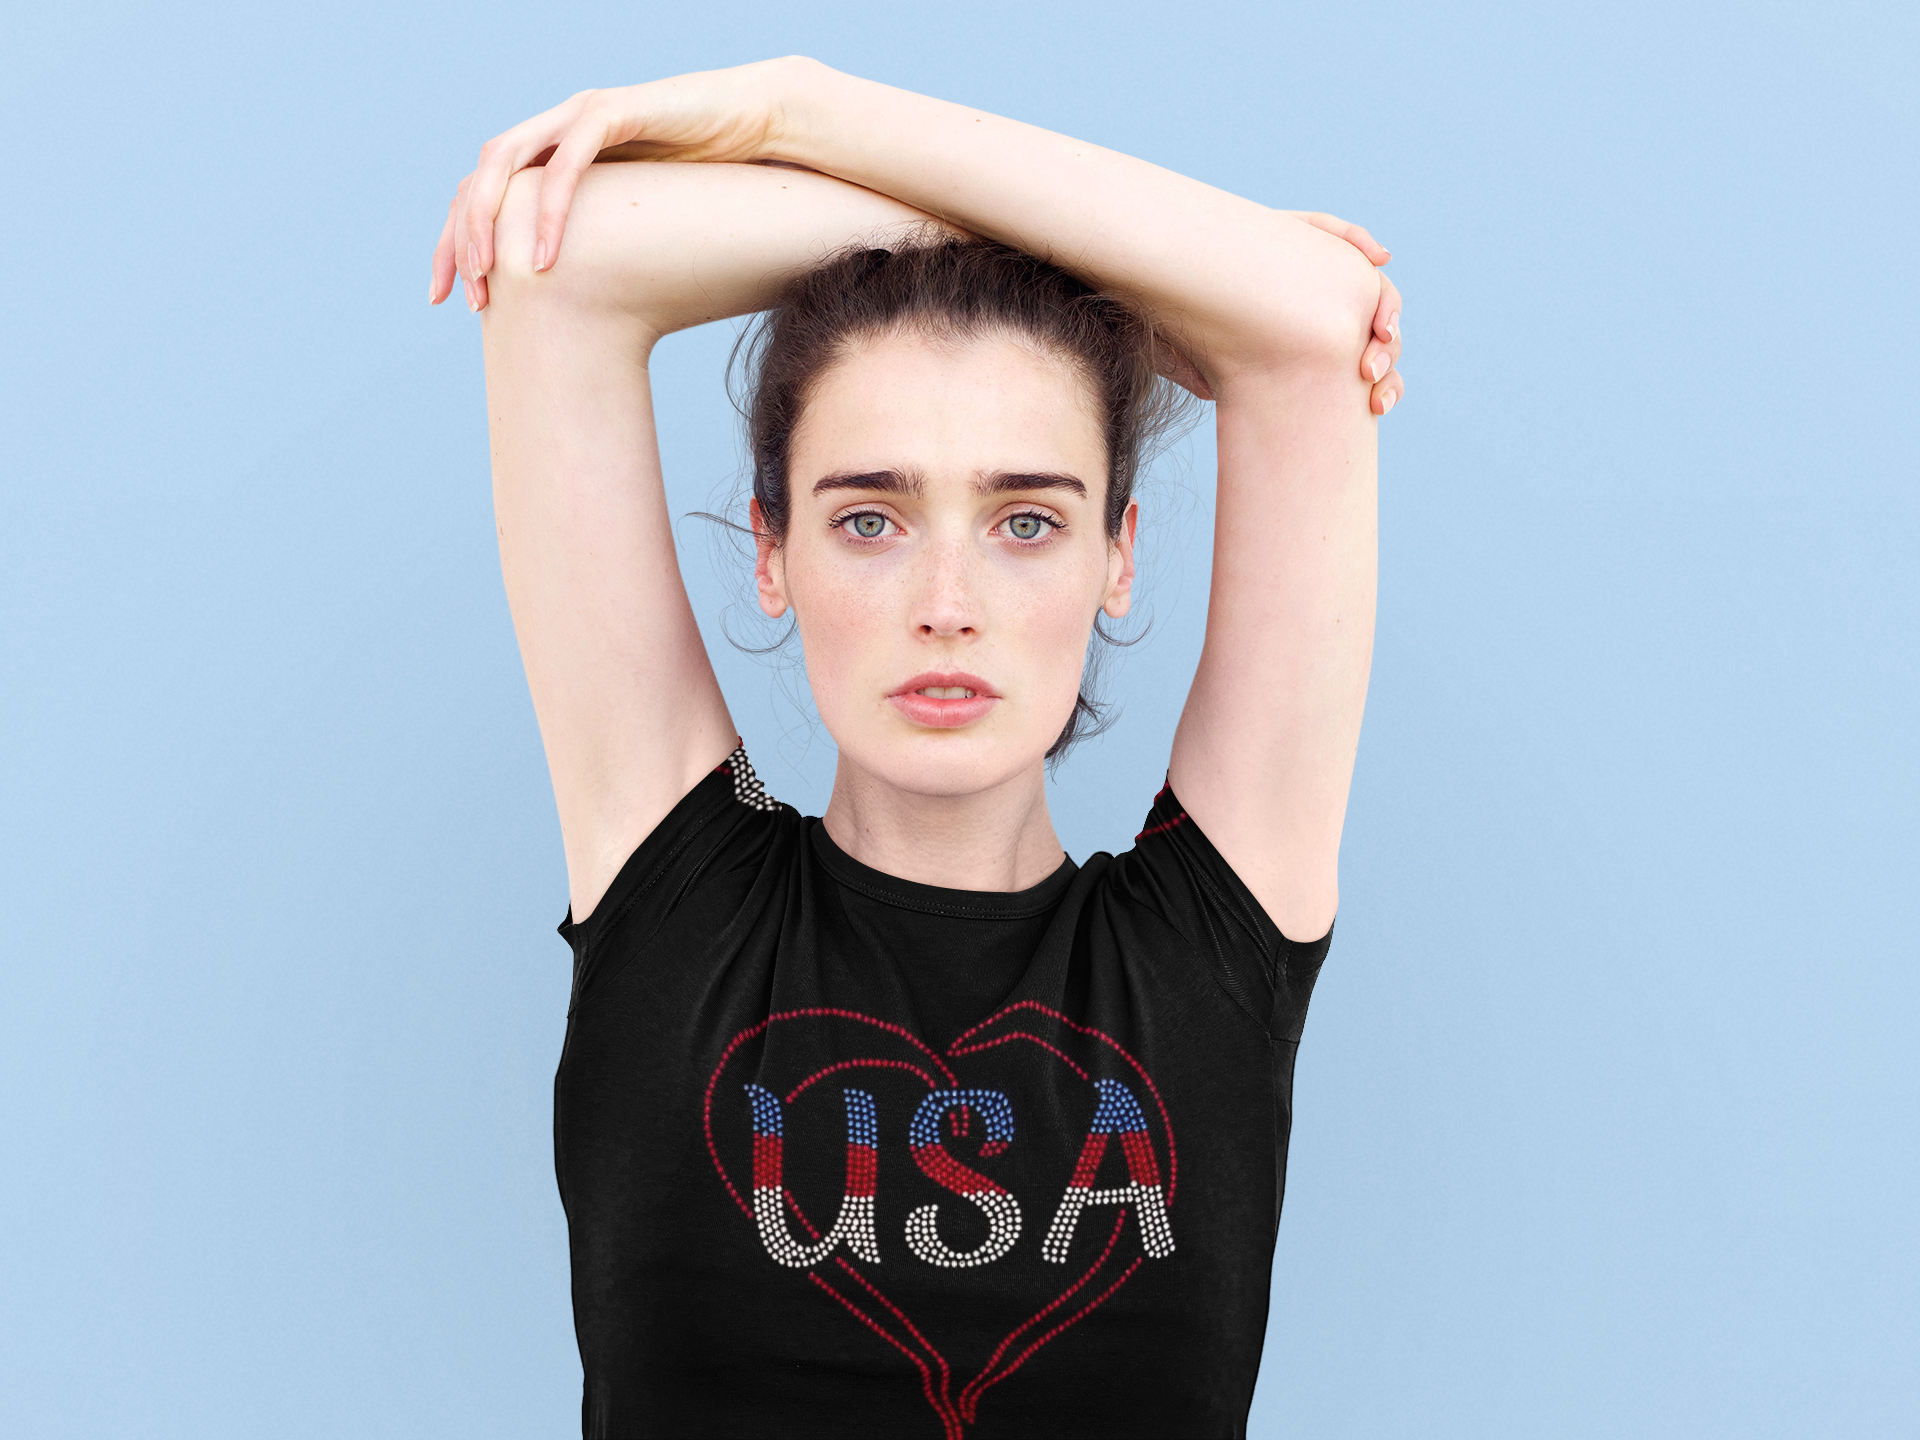 USA with Heart T-Shirts